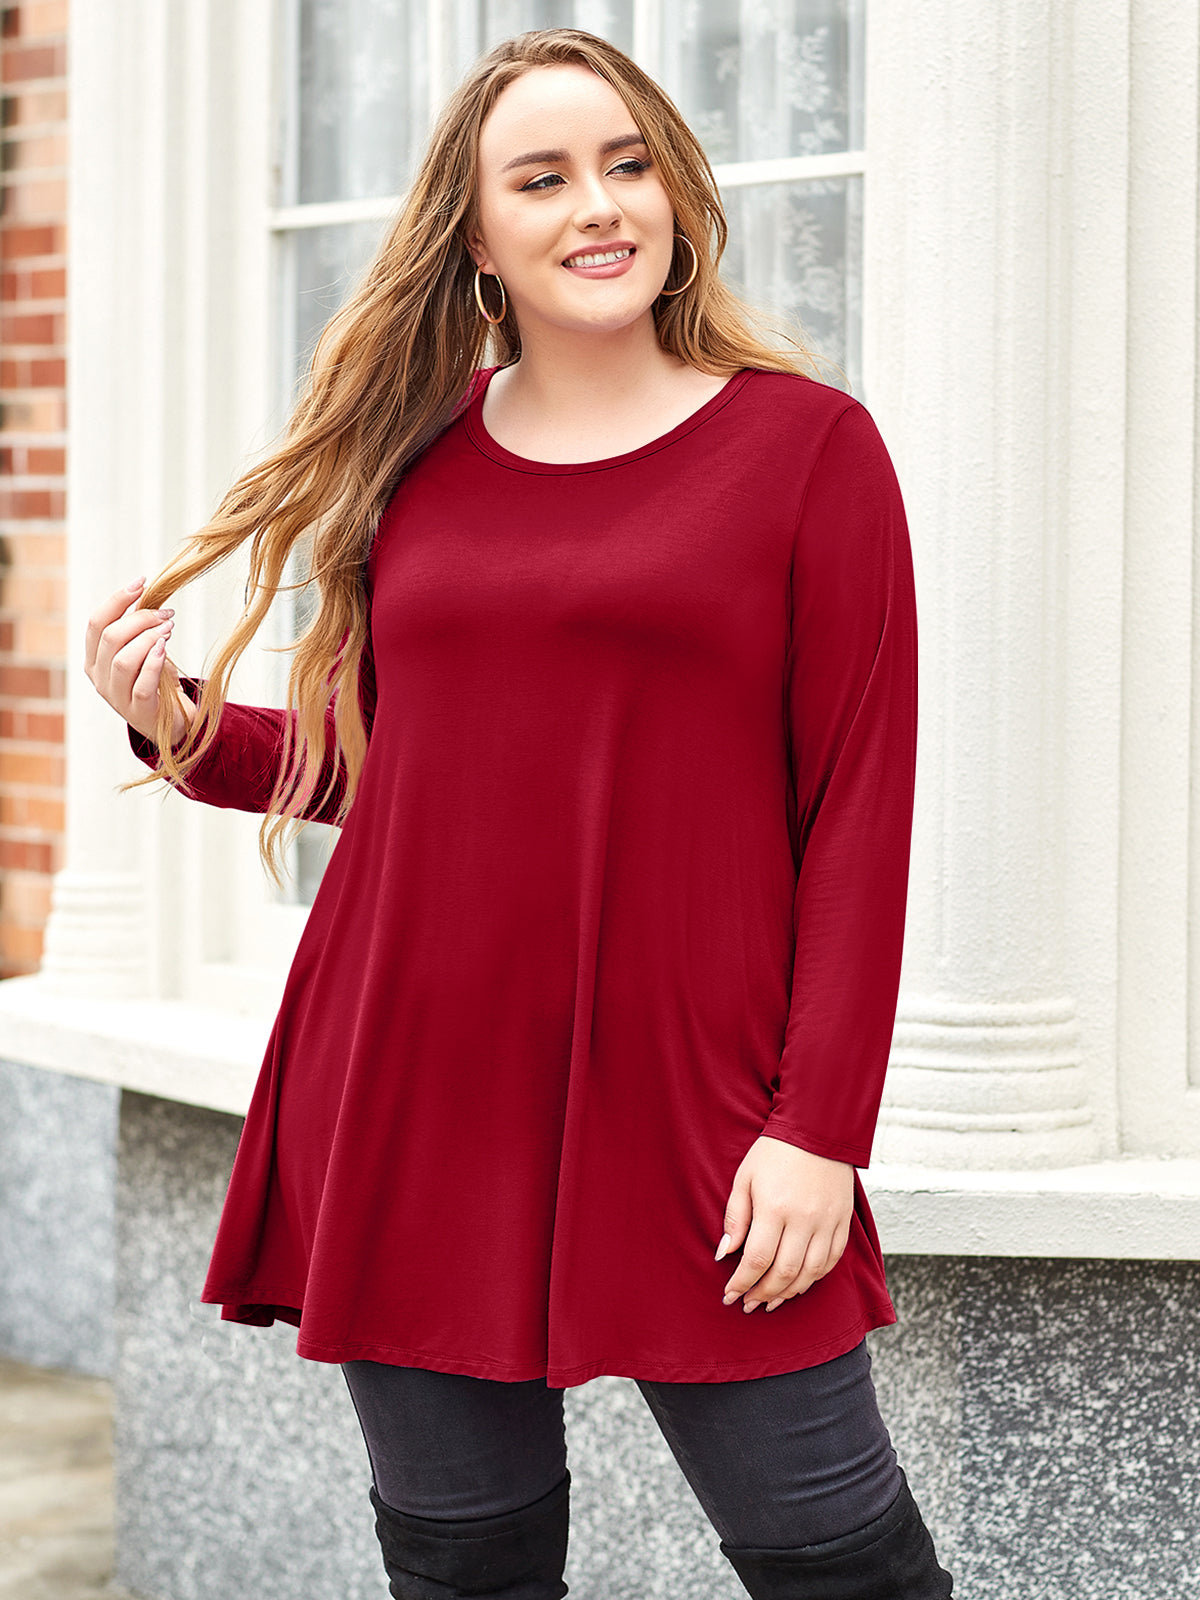 LARACE Plus Size Tunic Tops for Women Long Sleeve Swing Shirt Loose Fit  Flowy Clothing for Leggings 8053 - Wine Red / 1XL